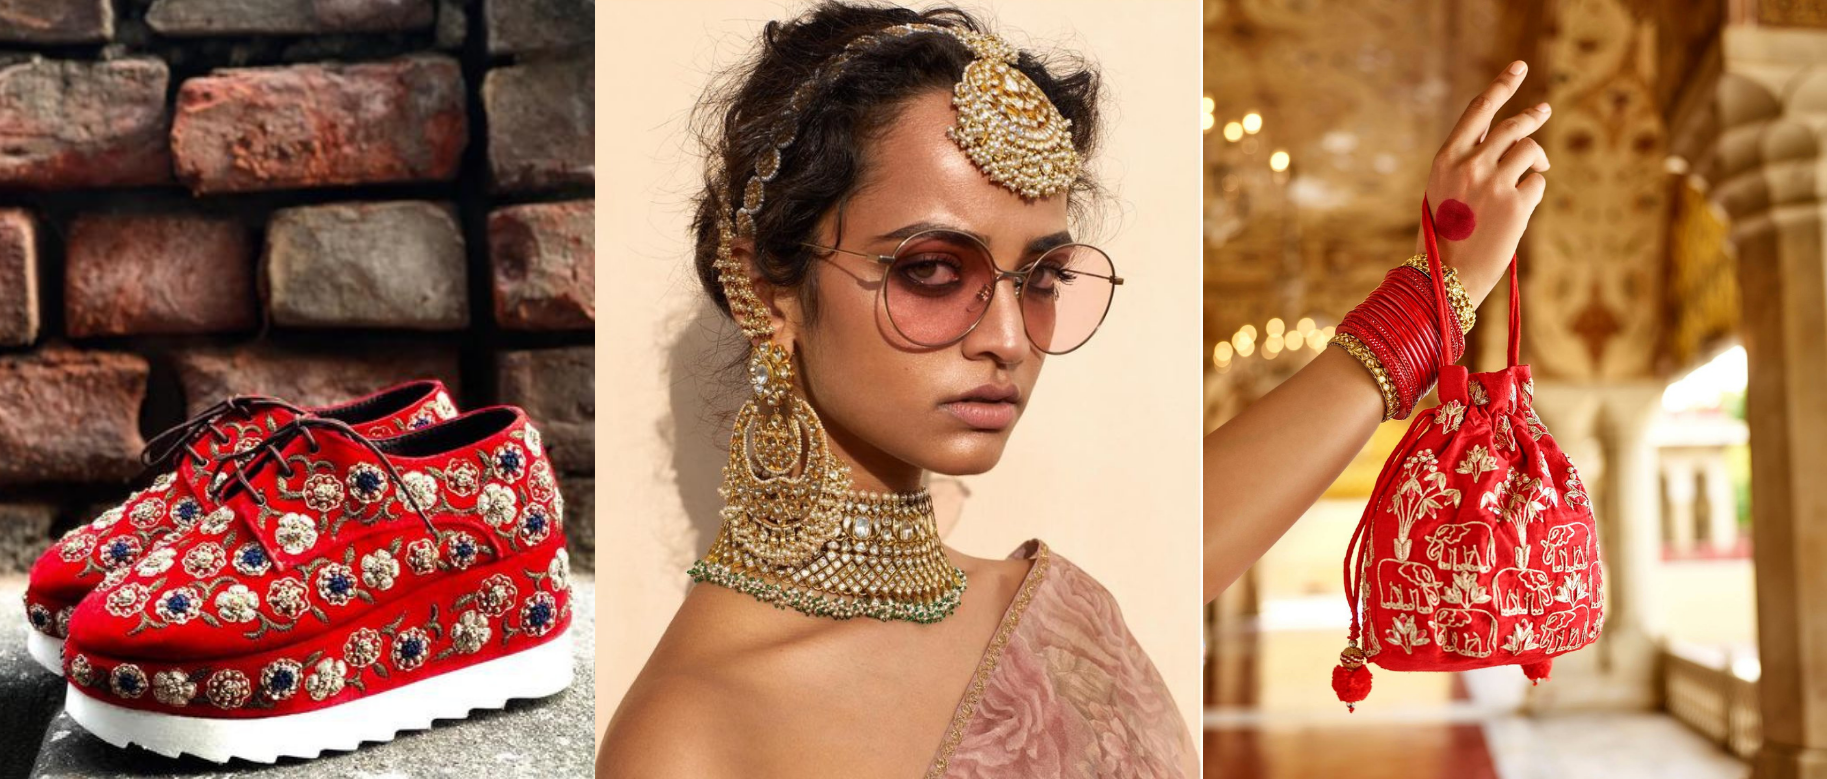 Bridal Fashion Accessories Trends: What will be fashionable in